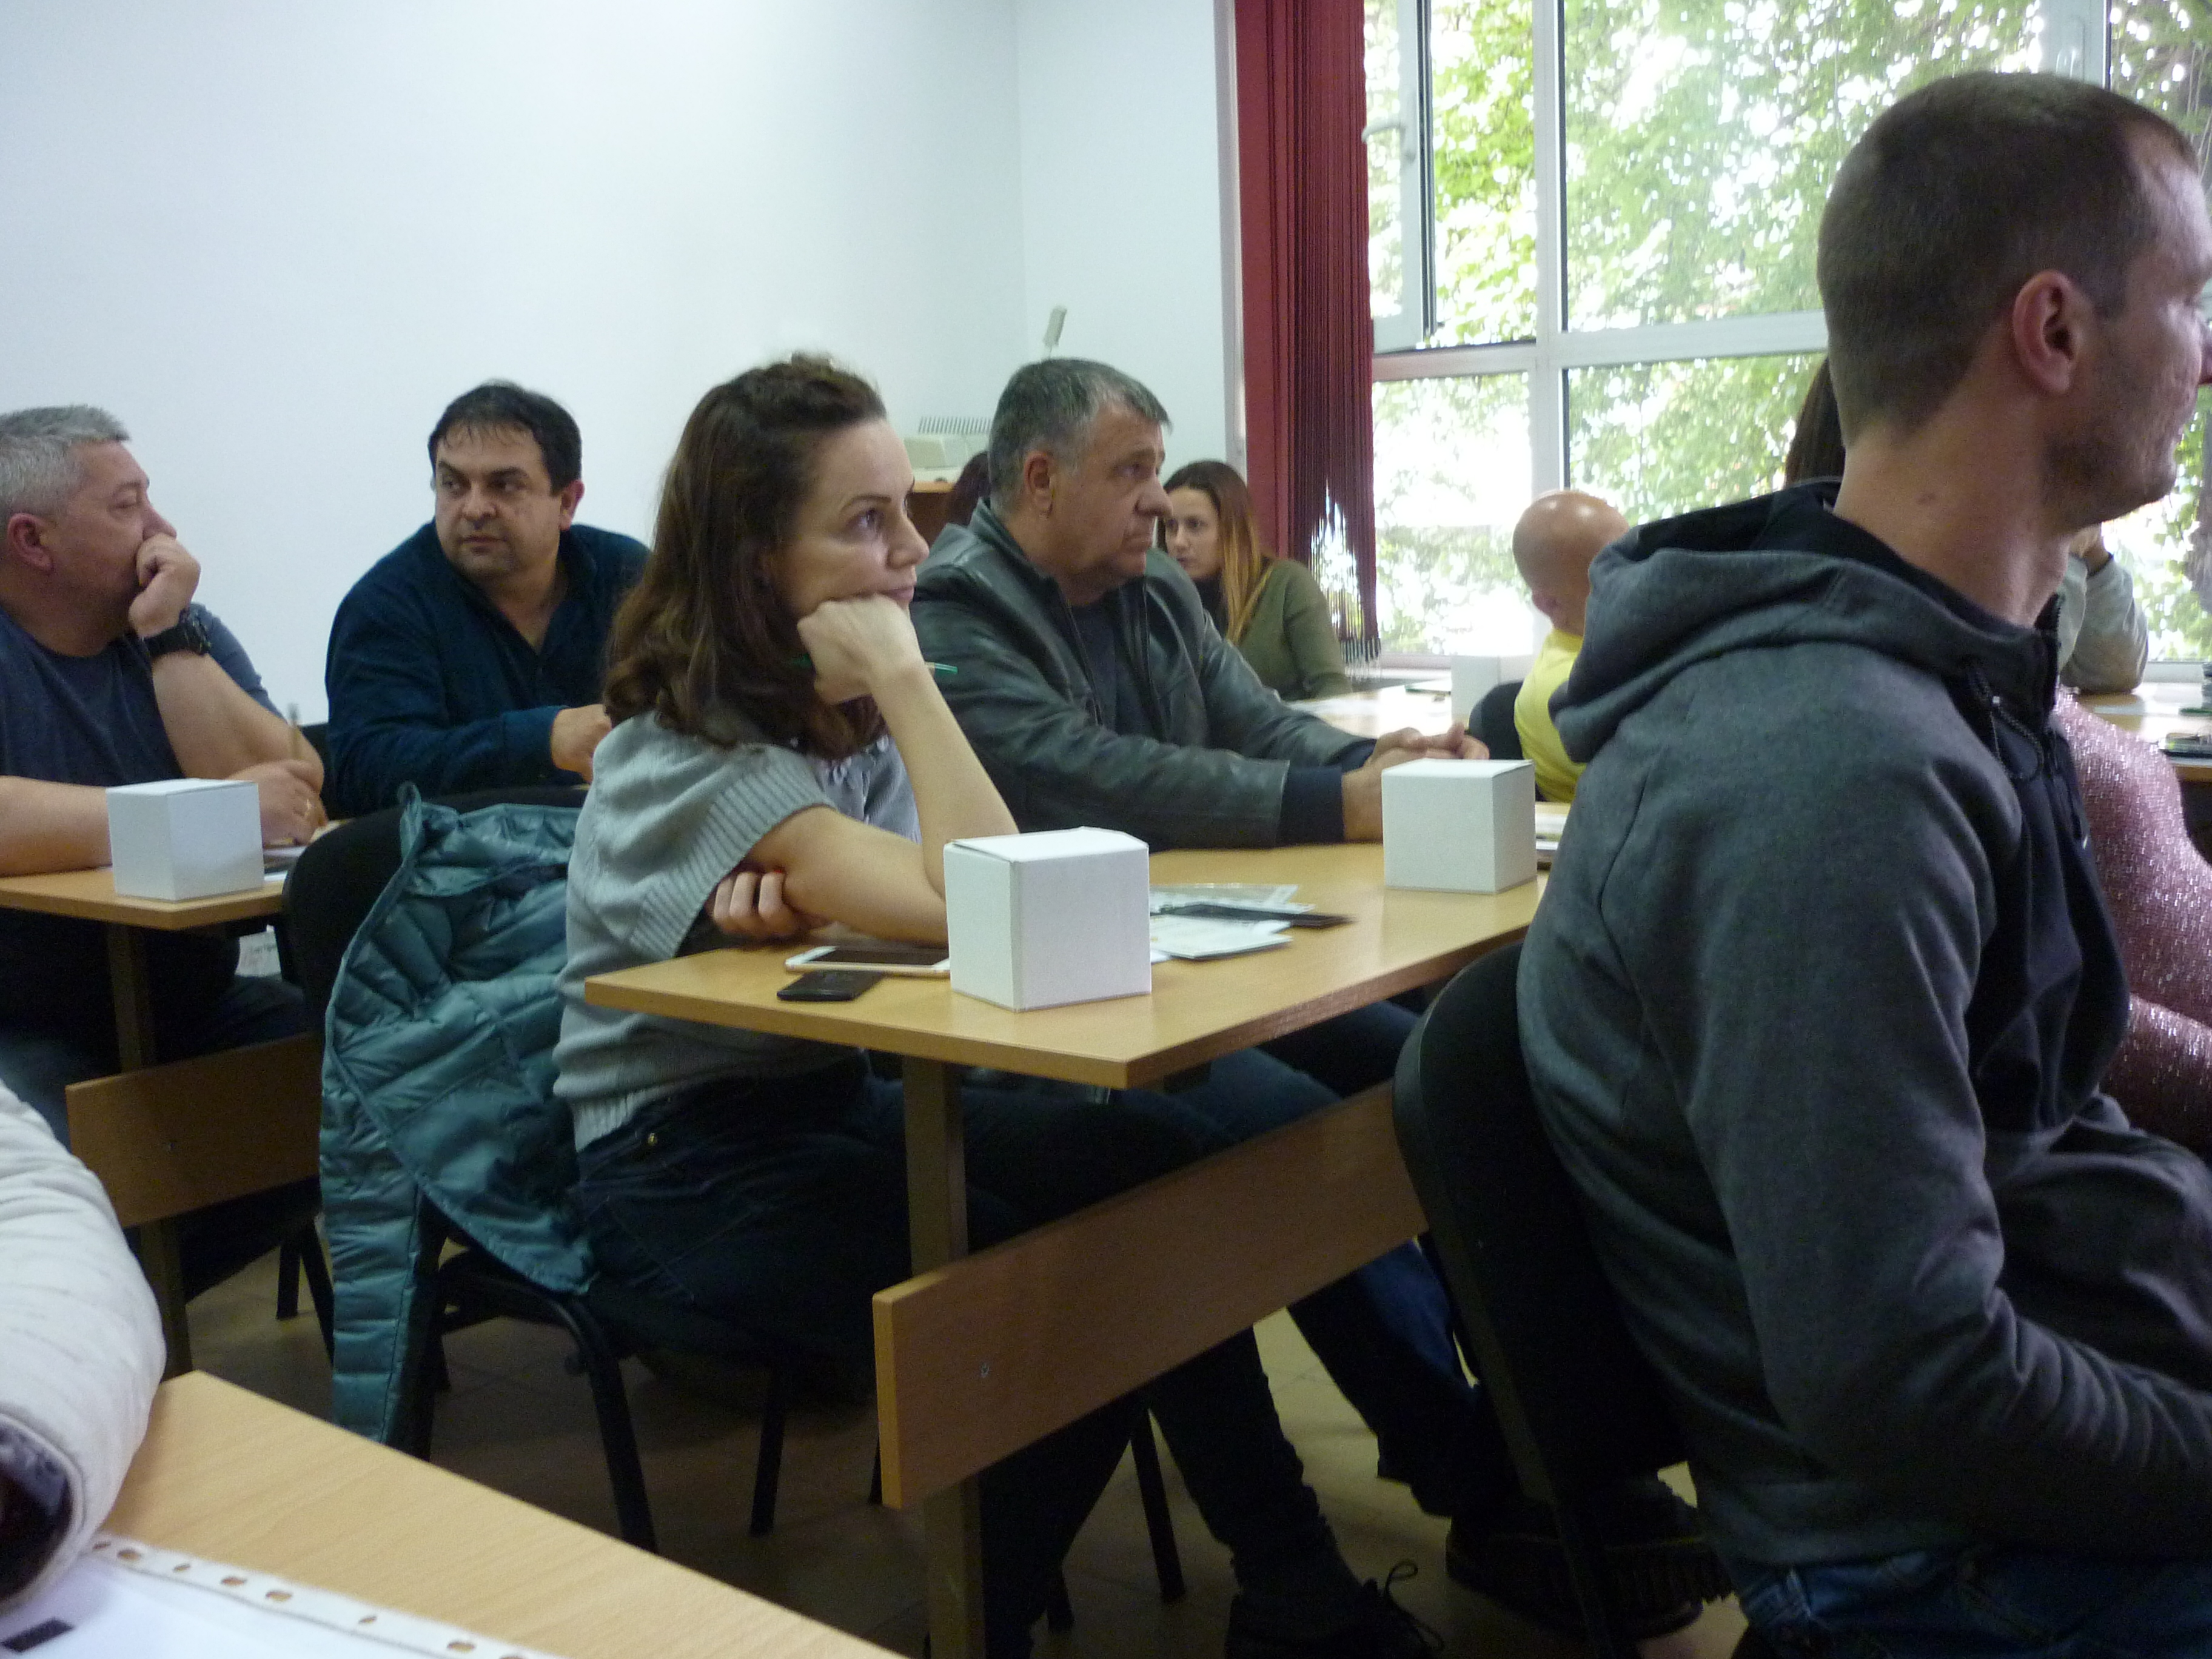 Mentoring for start-ups was held on May 17, 2019 in the city of Gabrovo